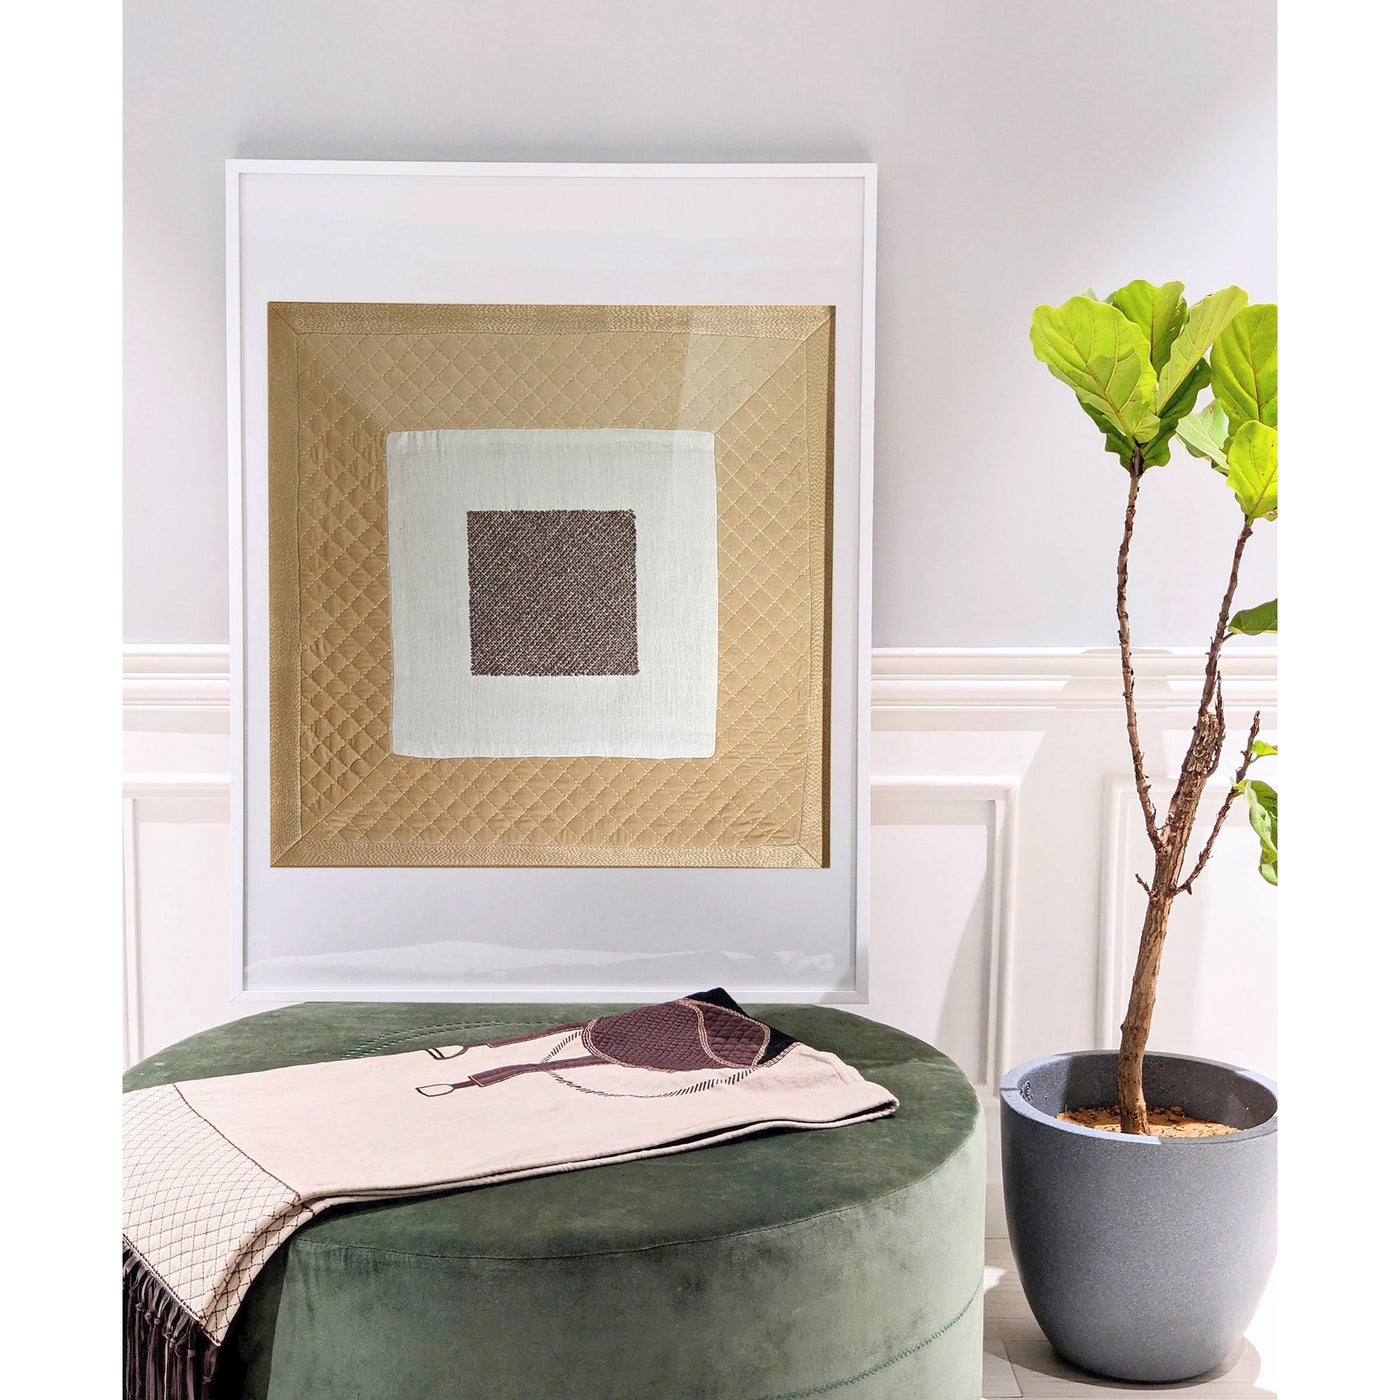 The XL Textile Art Collection by BH is focused on the best handcrafting for a statement piece. Our boxed frames have 3 dimensional depth and quality glass to preserve your artwork for years to come. 